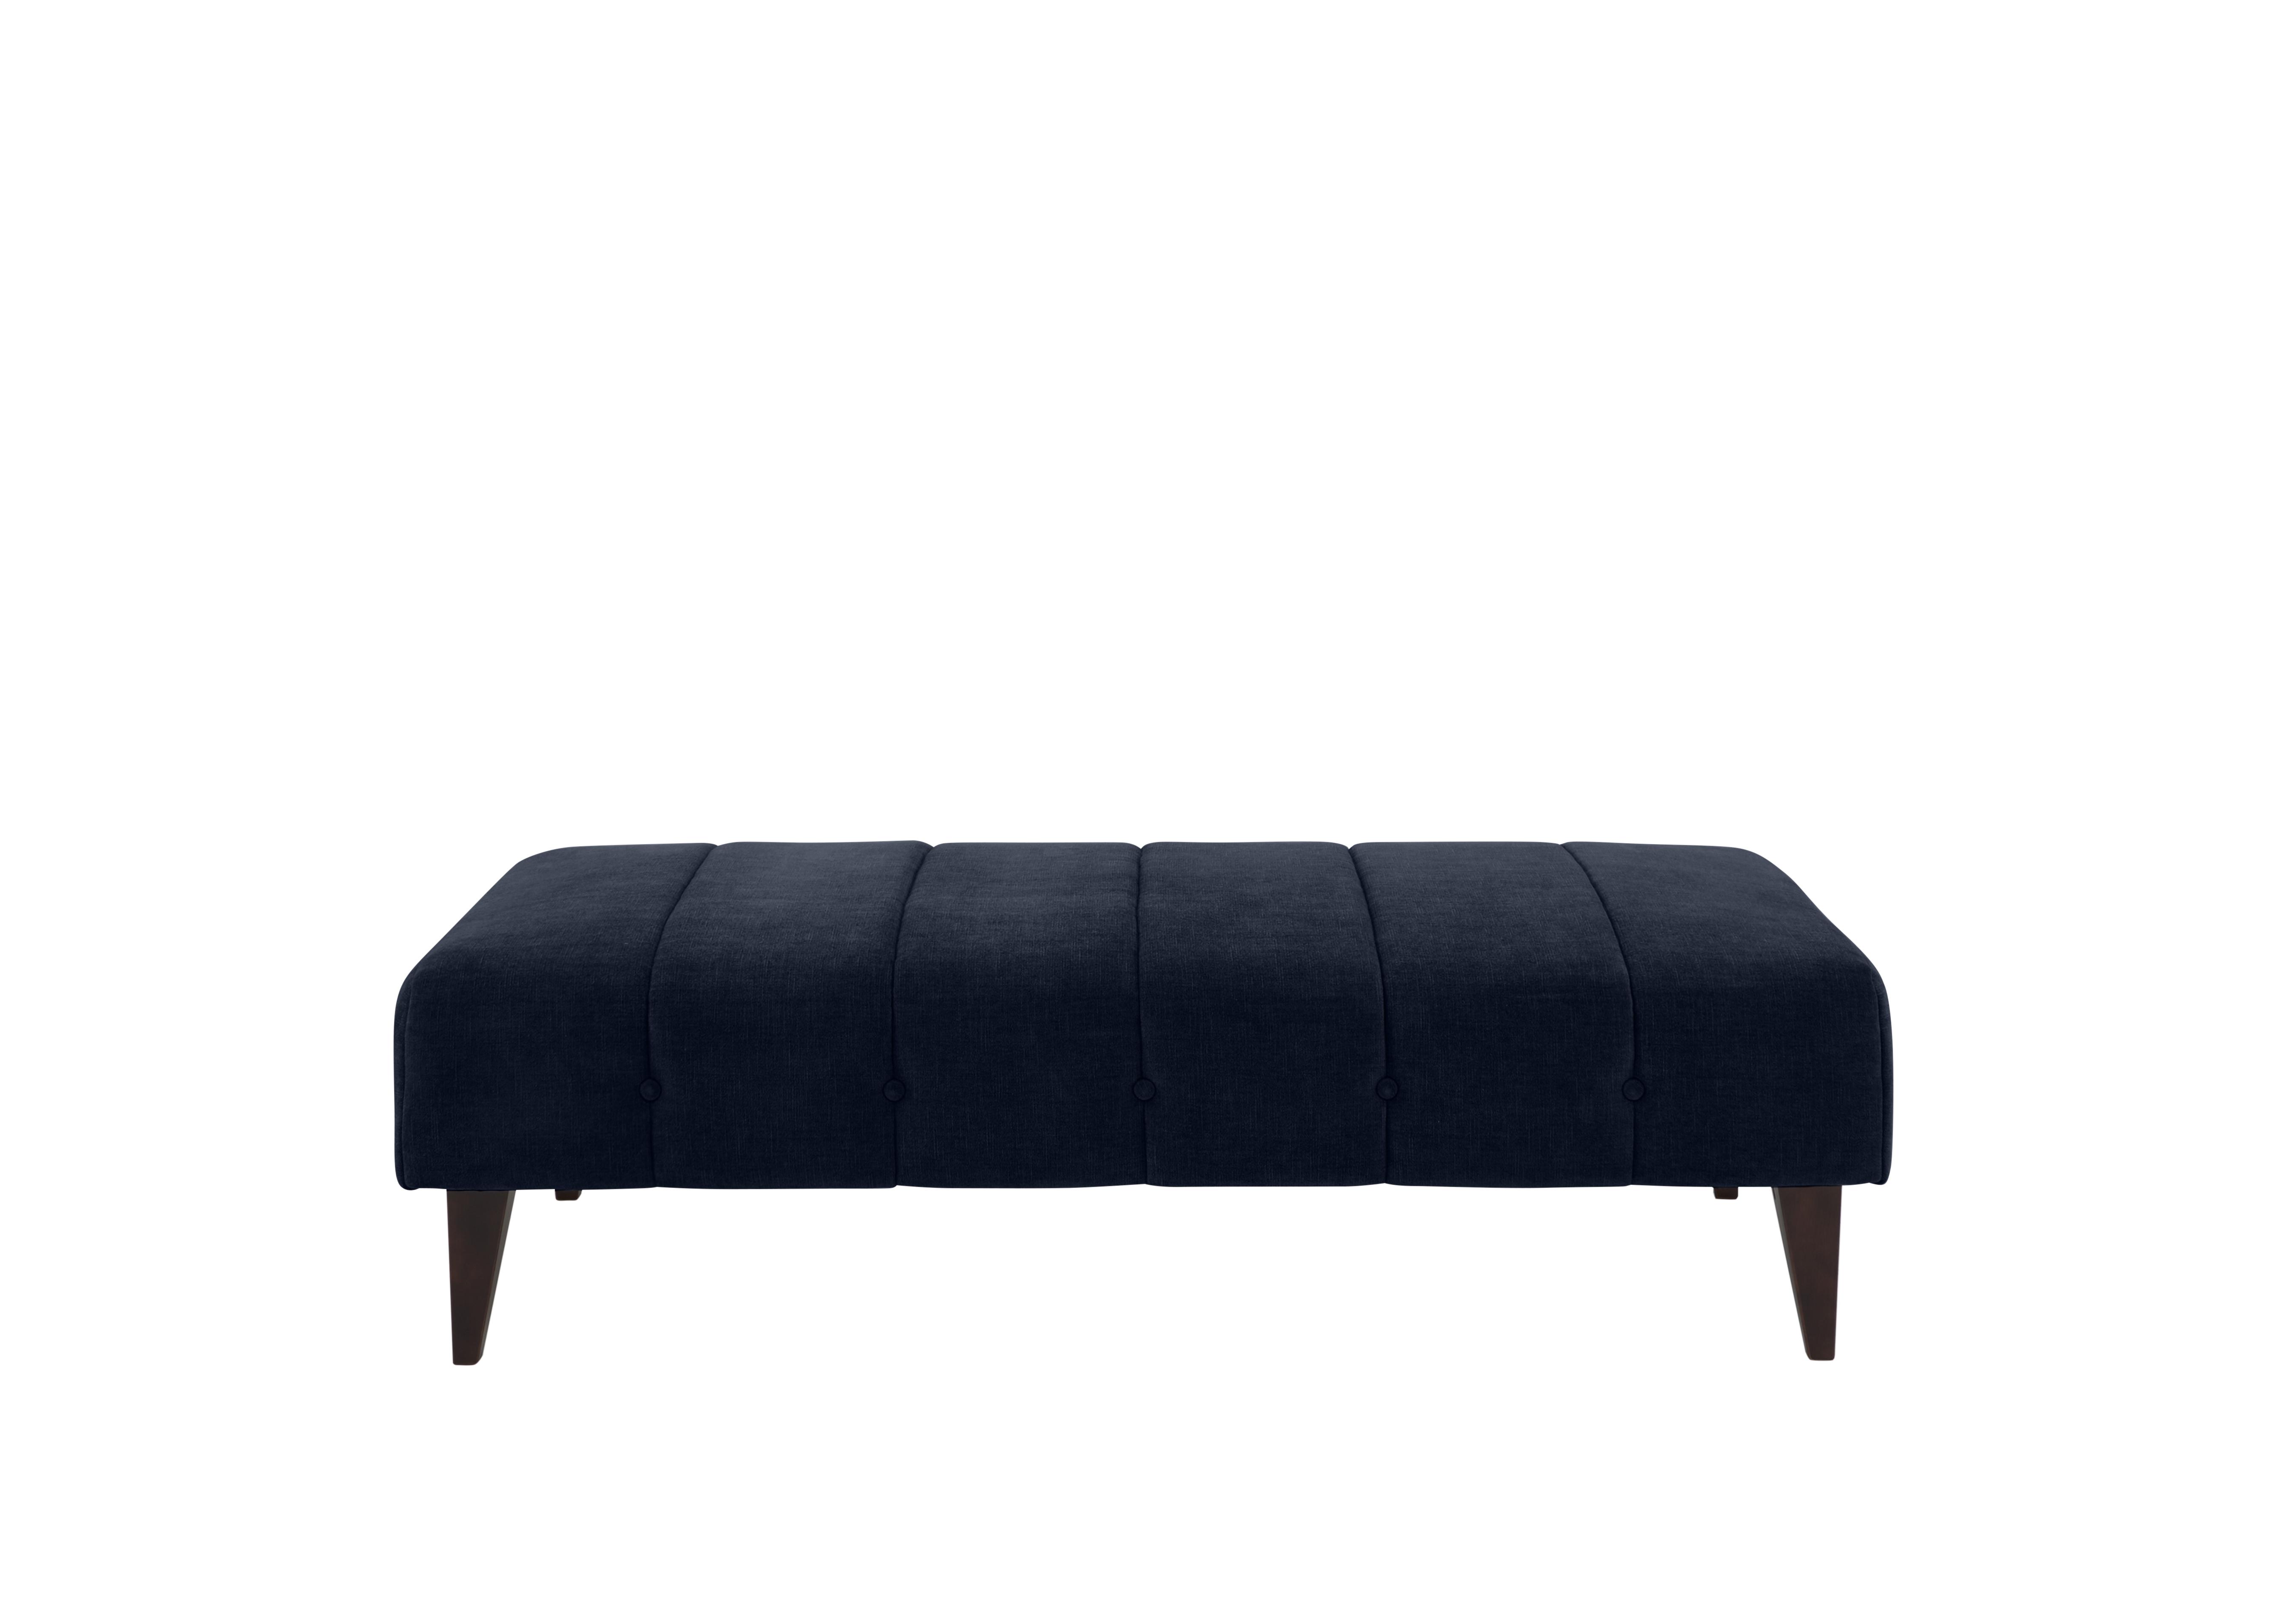 Sumptuous Fabric Bench Footstool in Chamonix Navy Dk/Gold on Furniture Village